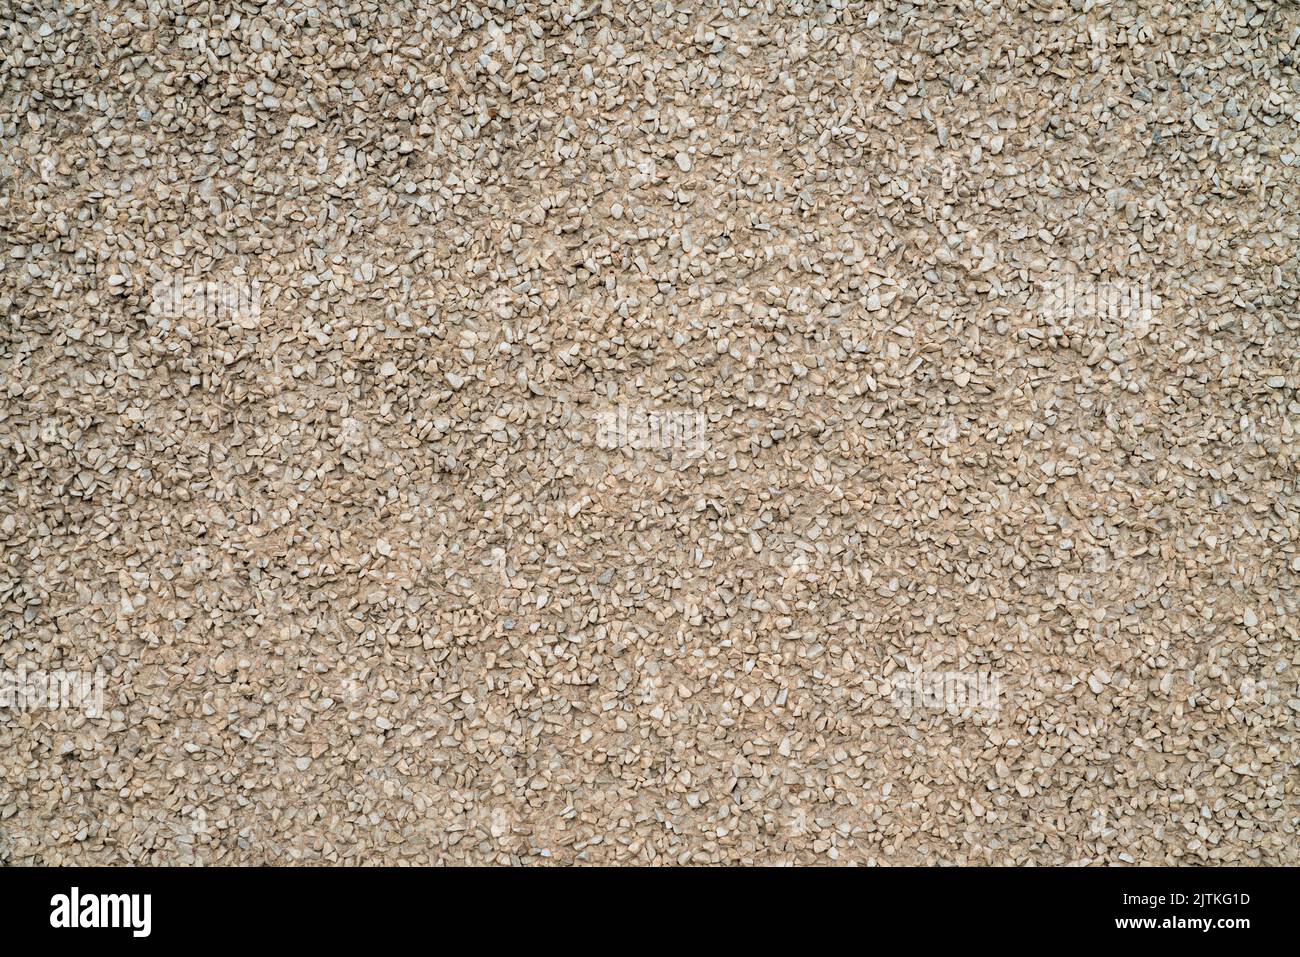 urban texture and background - building facade finished with fine gravel Stock Photo